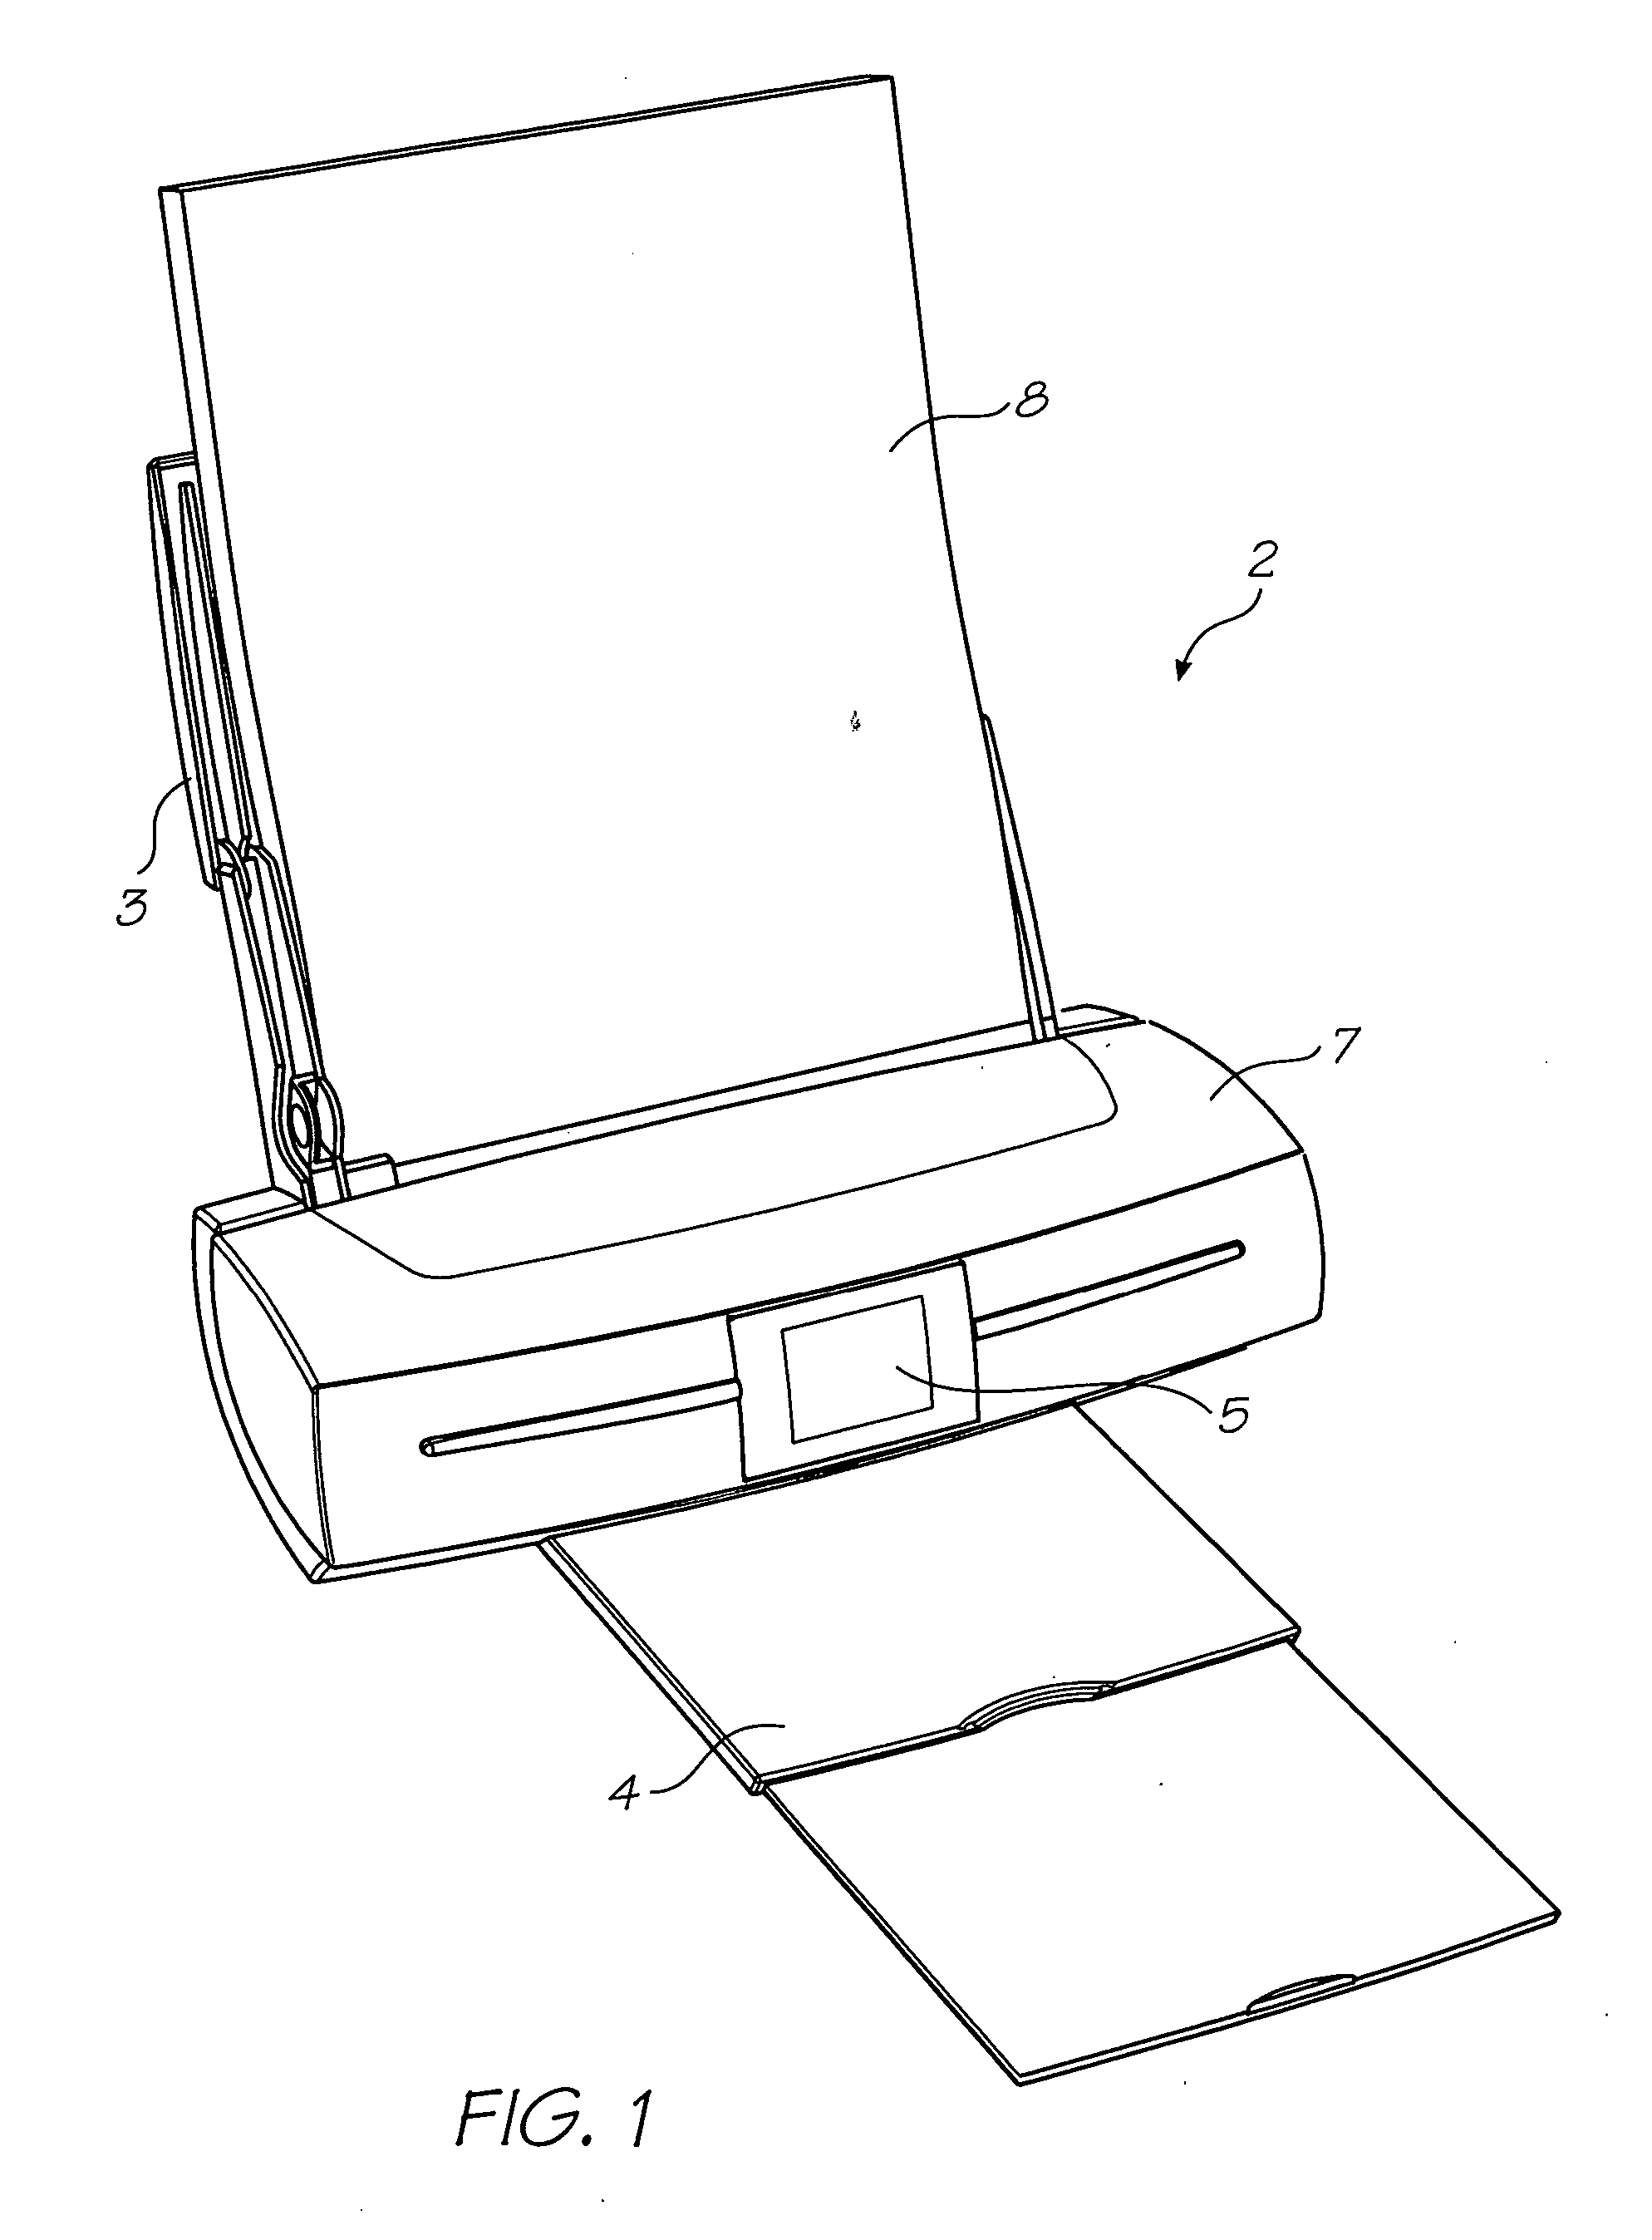 Inkjet printhead with integrated circuit mounted on polymer sealing film